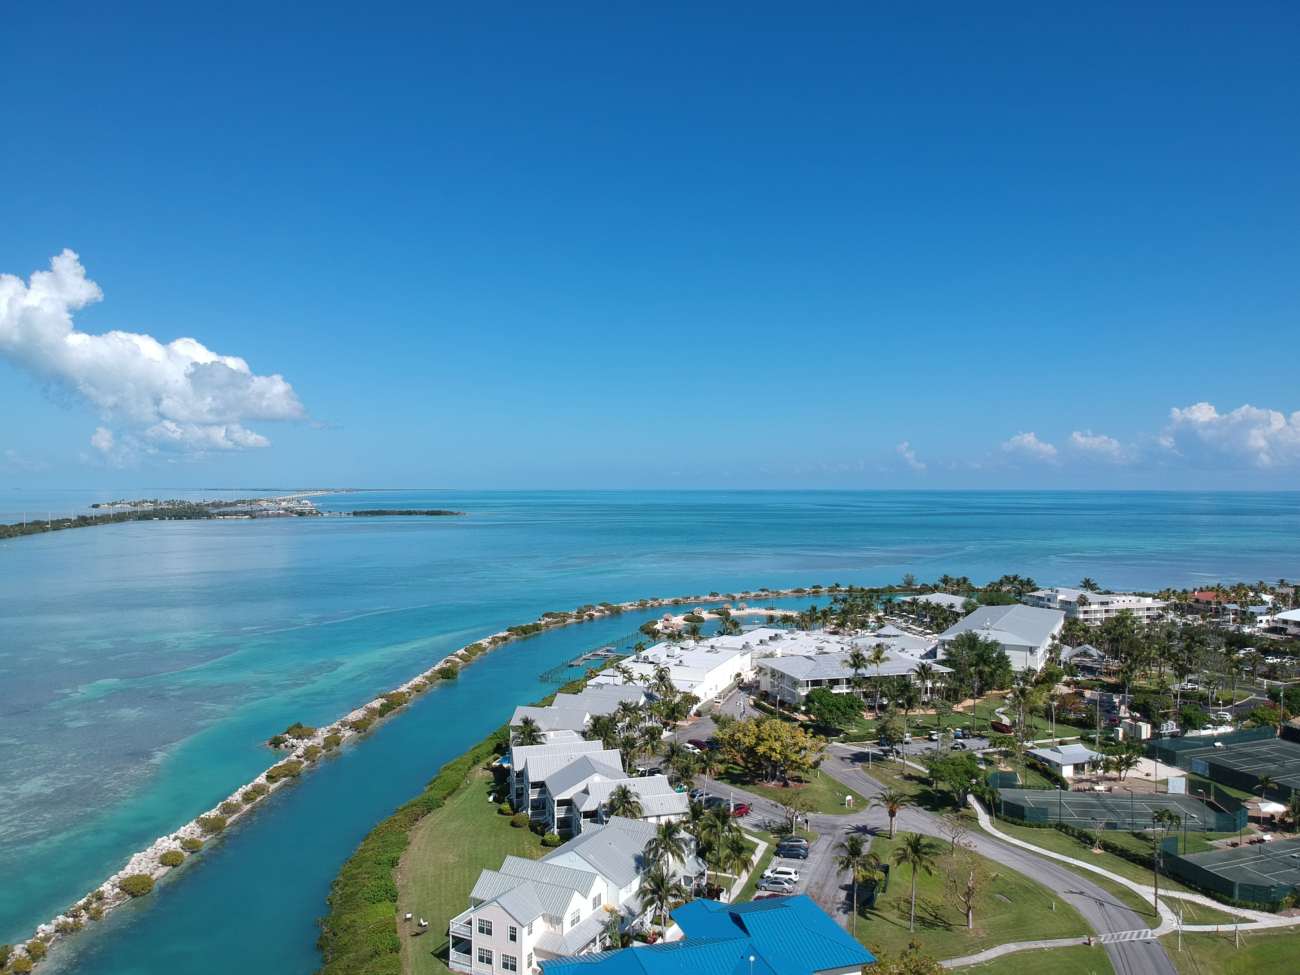 Aerial Views of Hawks Cay Resort in Duck Key of the Florida Keys. Family Resorts in Florida.